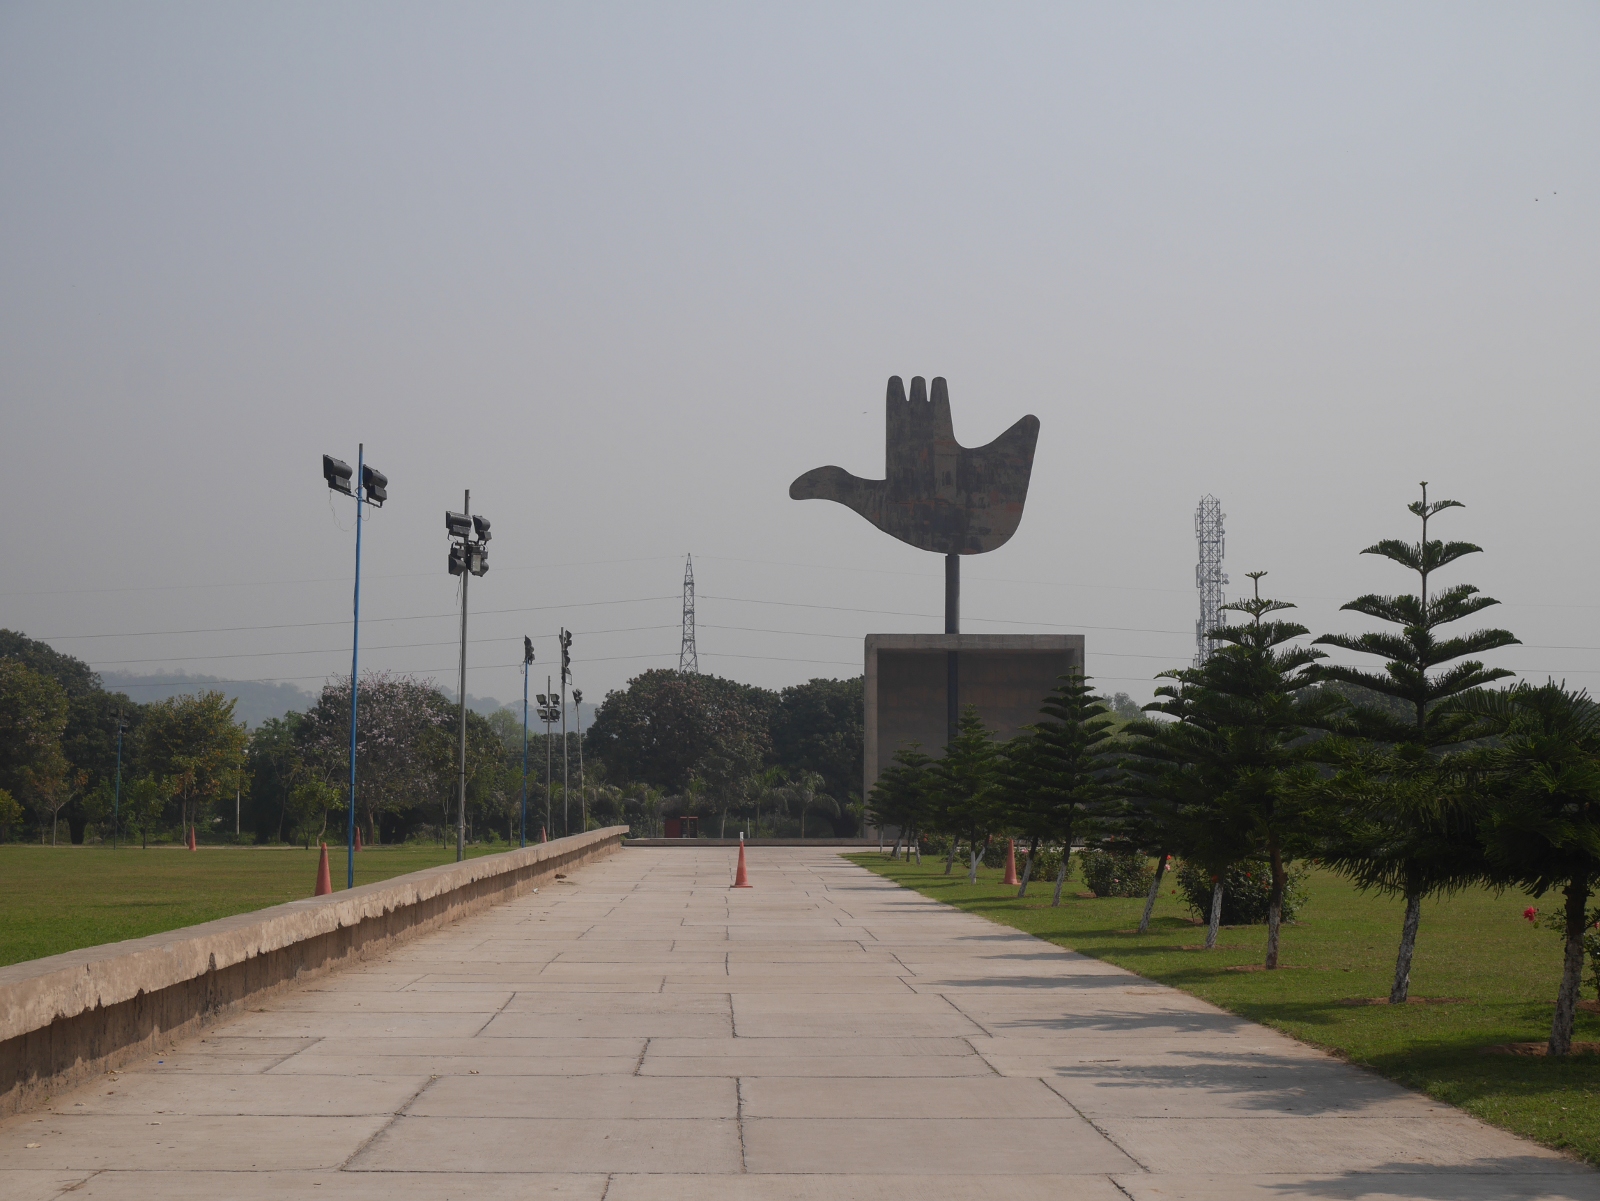 Chandigarh's Open Hand Monument, designed by Le Corbusier but not constructed until 1985.